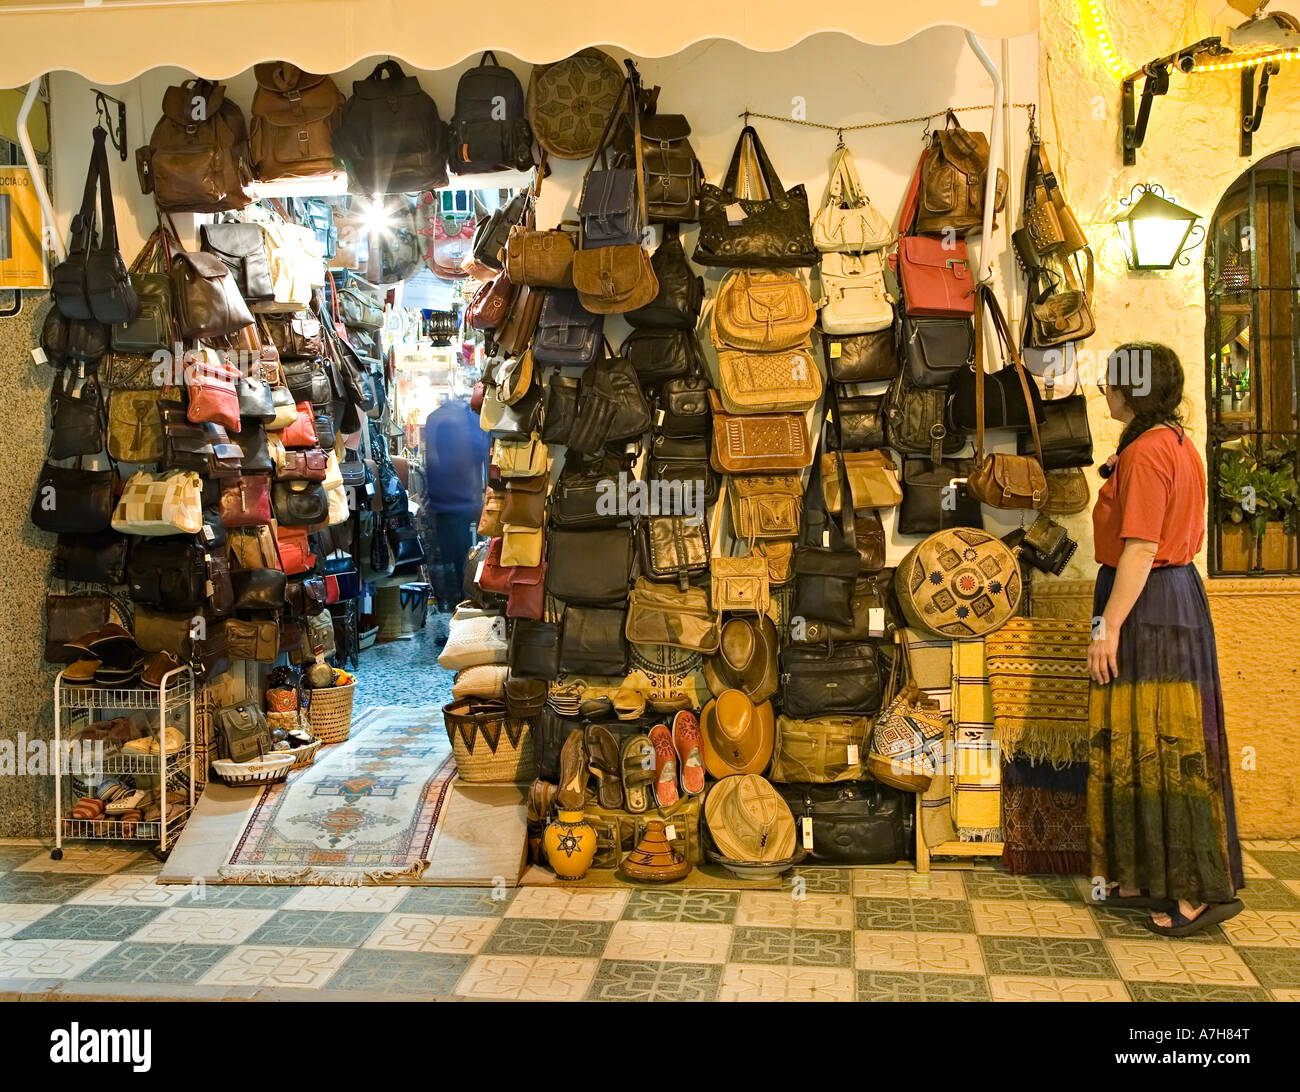 Woman tourist looking at handbags and leather goods on sale outside shop in  evening Nerja Spain Stock Photo - Alamy